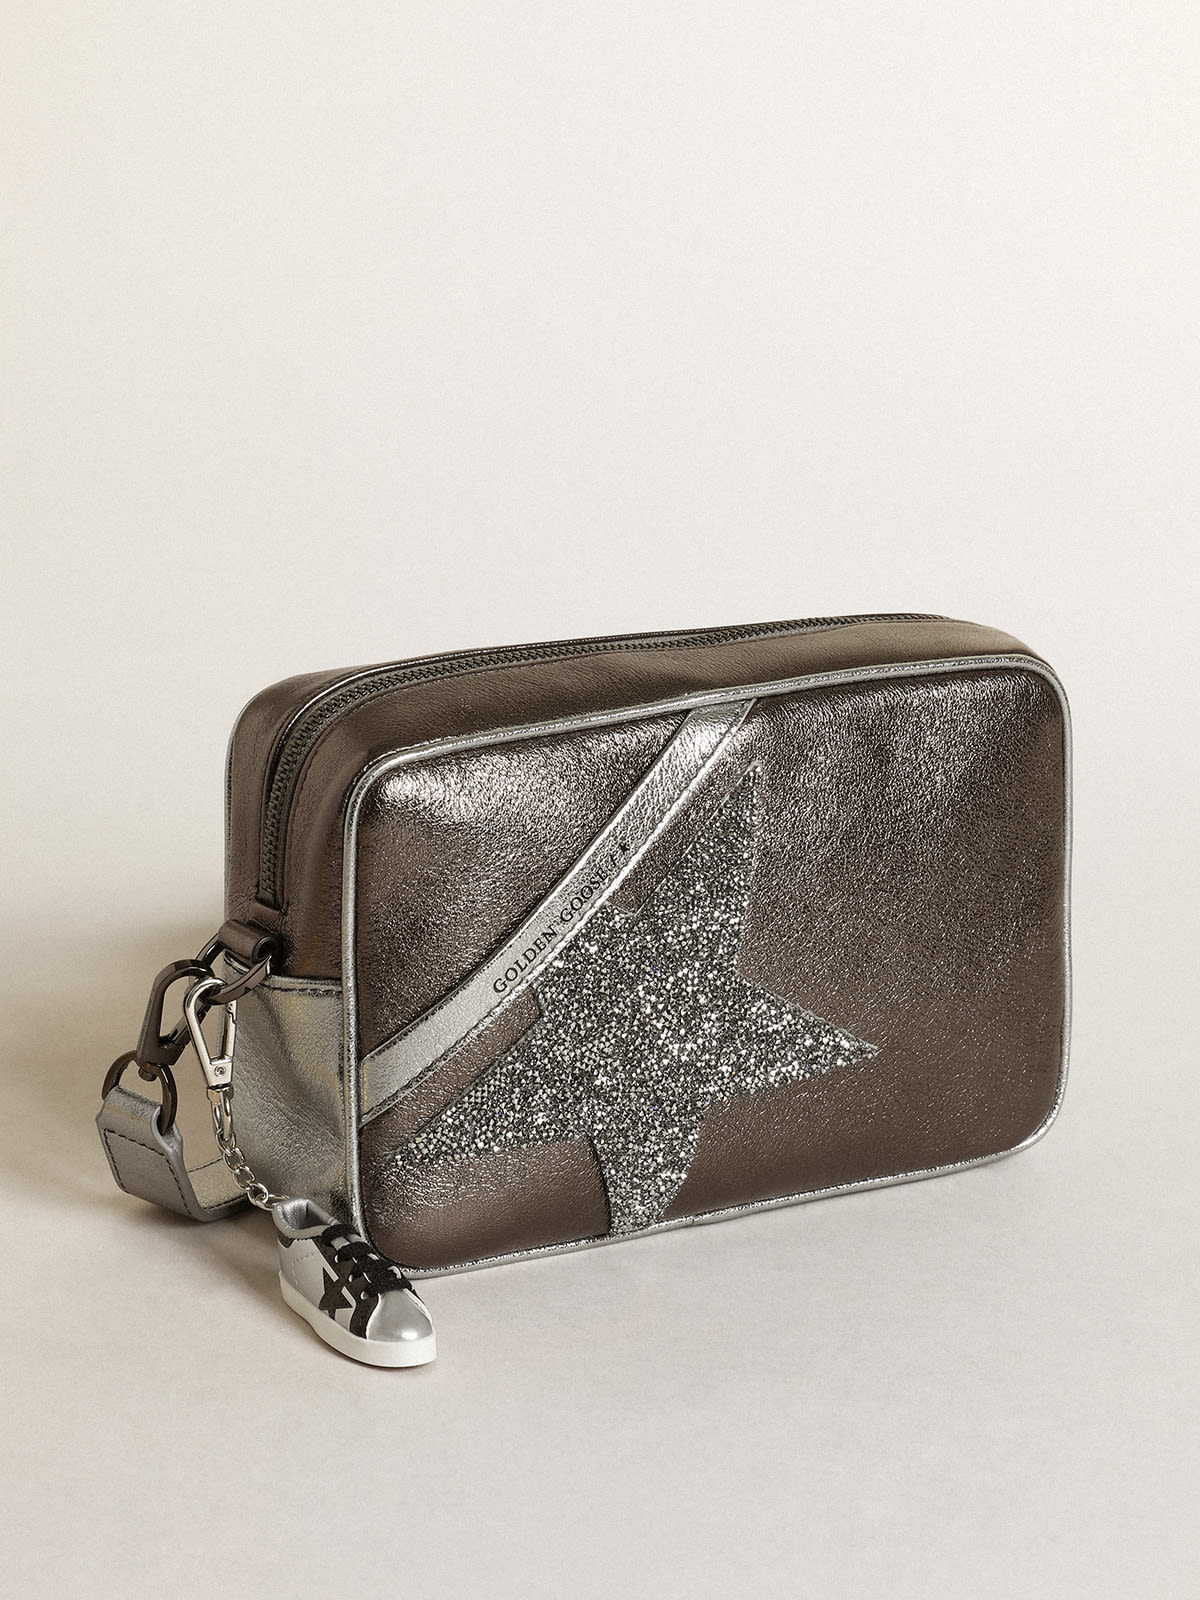 Golden Goose - Star Bag in silver and anthracite-gray laminated leather with Swarovski crystal star in 